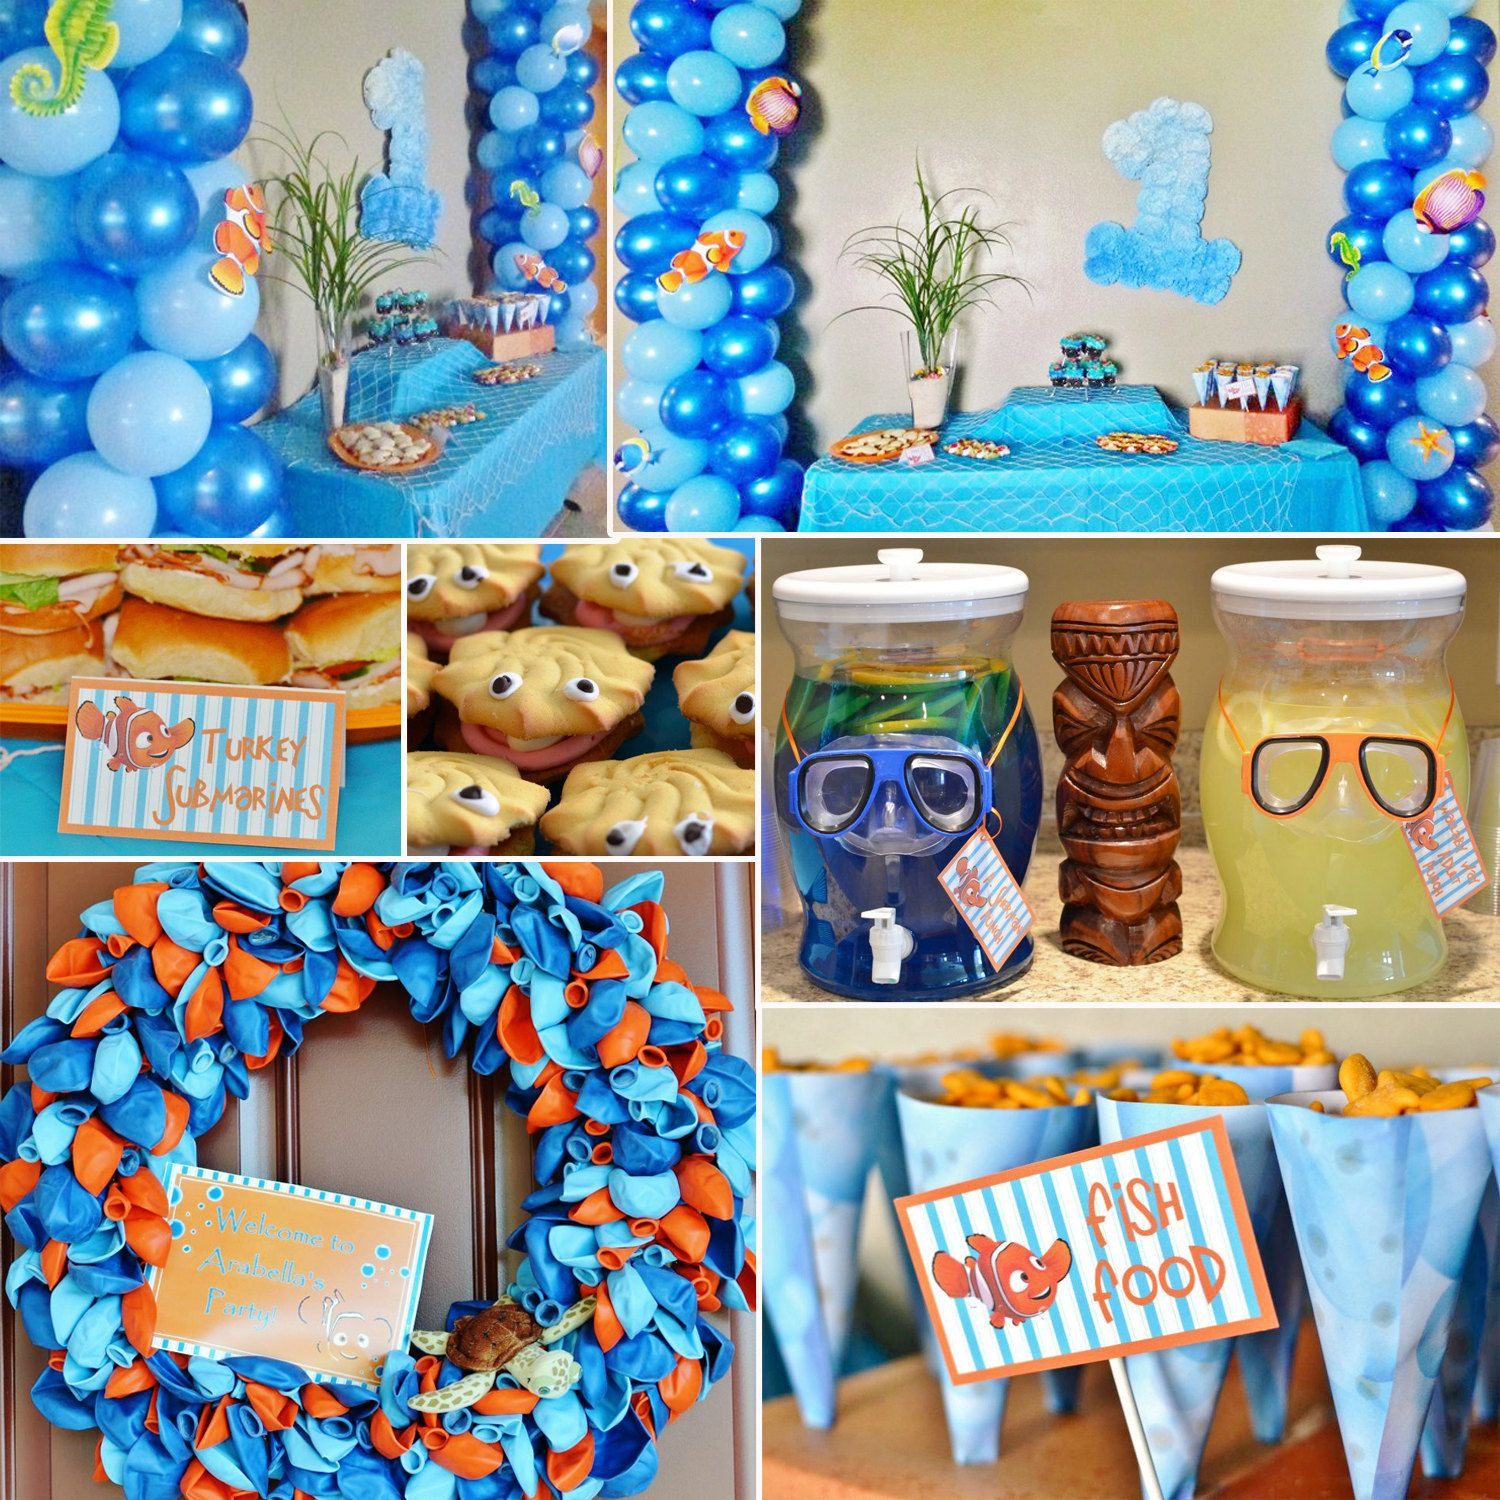 Finding Nemo Party Food Ideas
 DIY Digital Customized Finding Nemo Party Pack Bundle $45